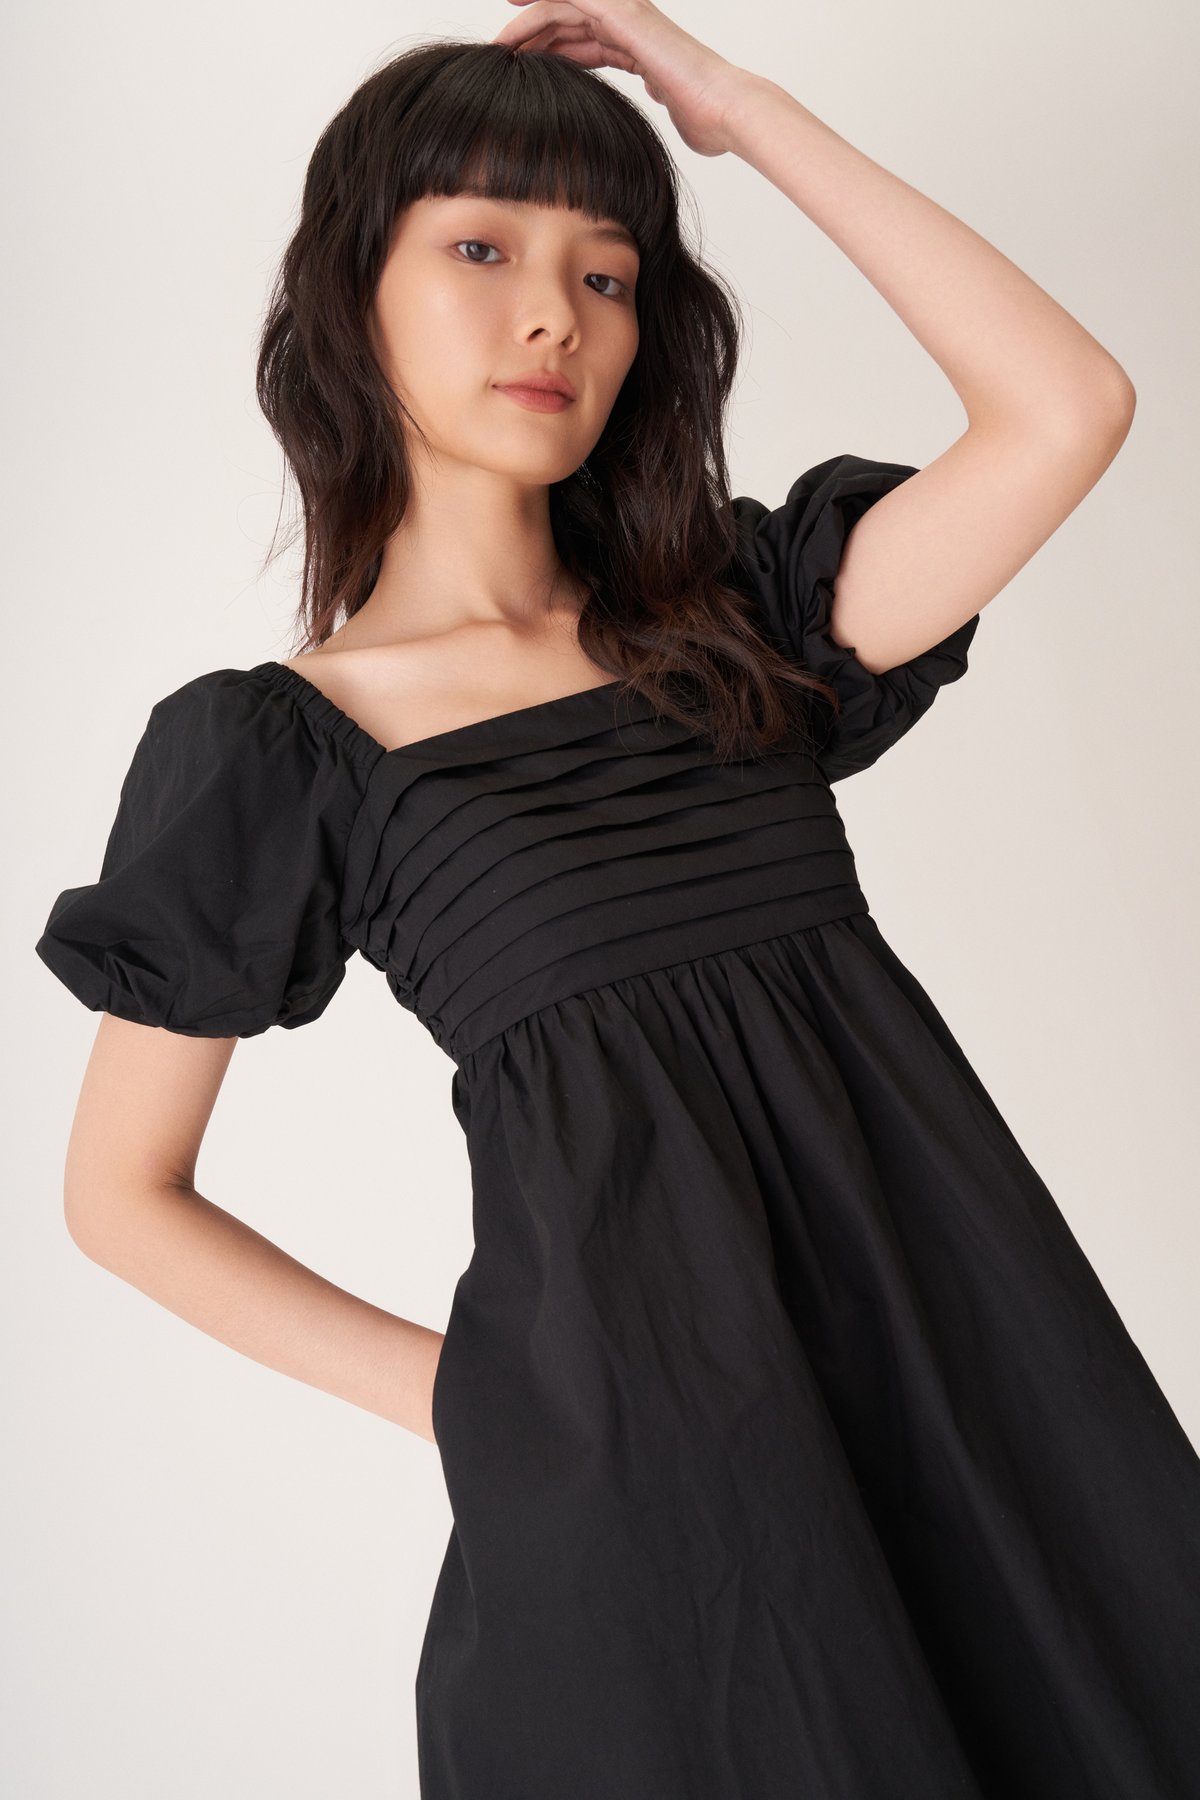 https://dum76bmz7do3s.cloudfront.net/sites/files/theclosetlover/images/products/202307/1200xAUTO/vienna_pleated_babydoll_dress_in_black-5.jpg